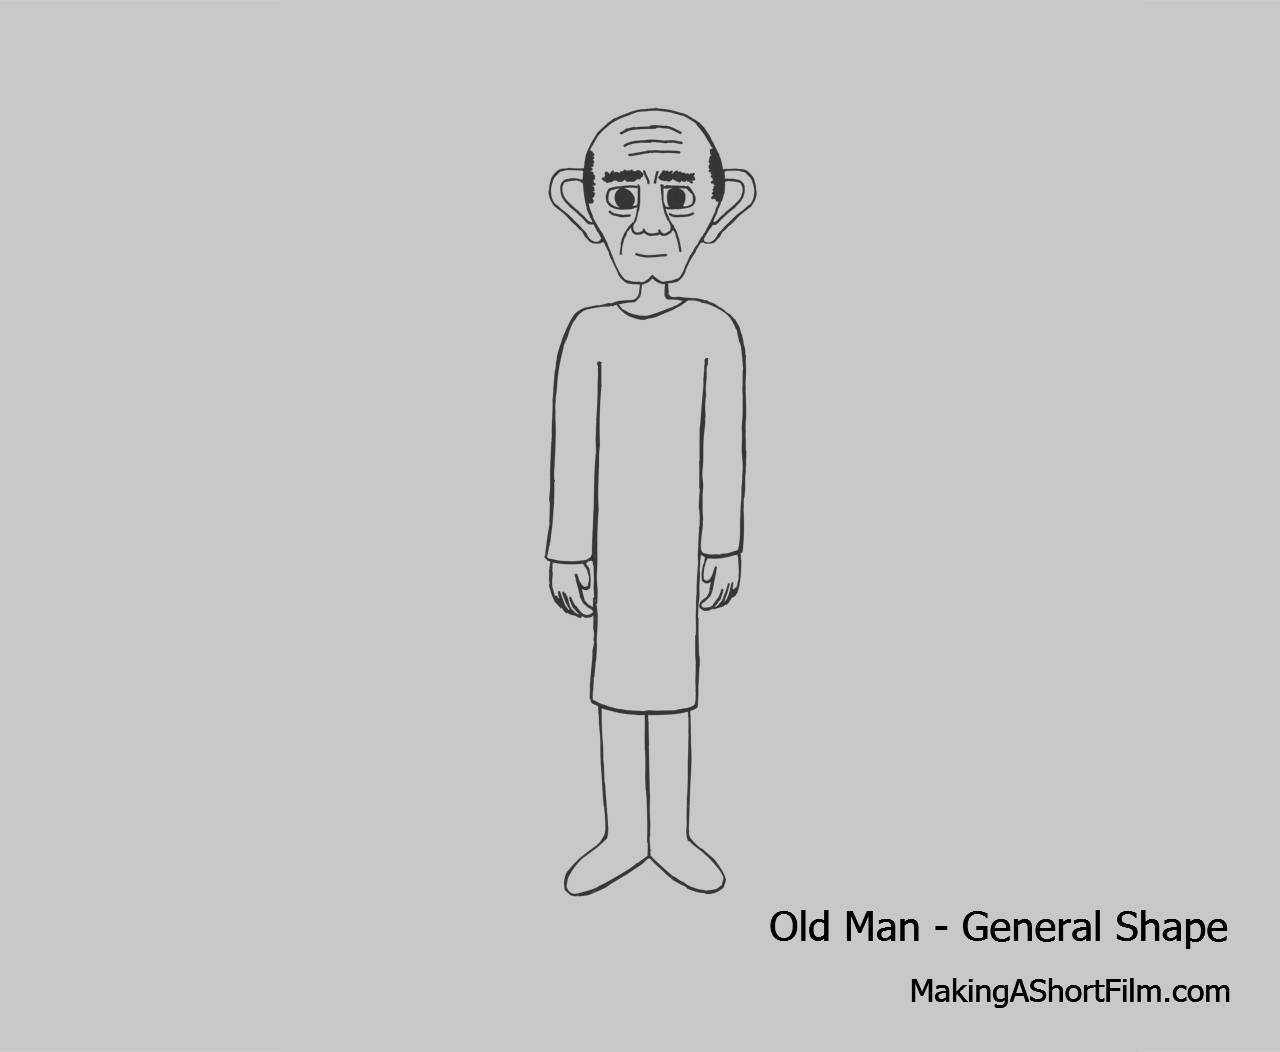 The General Shape of the Old Man